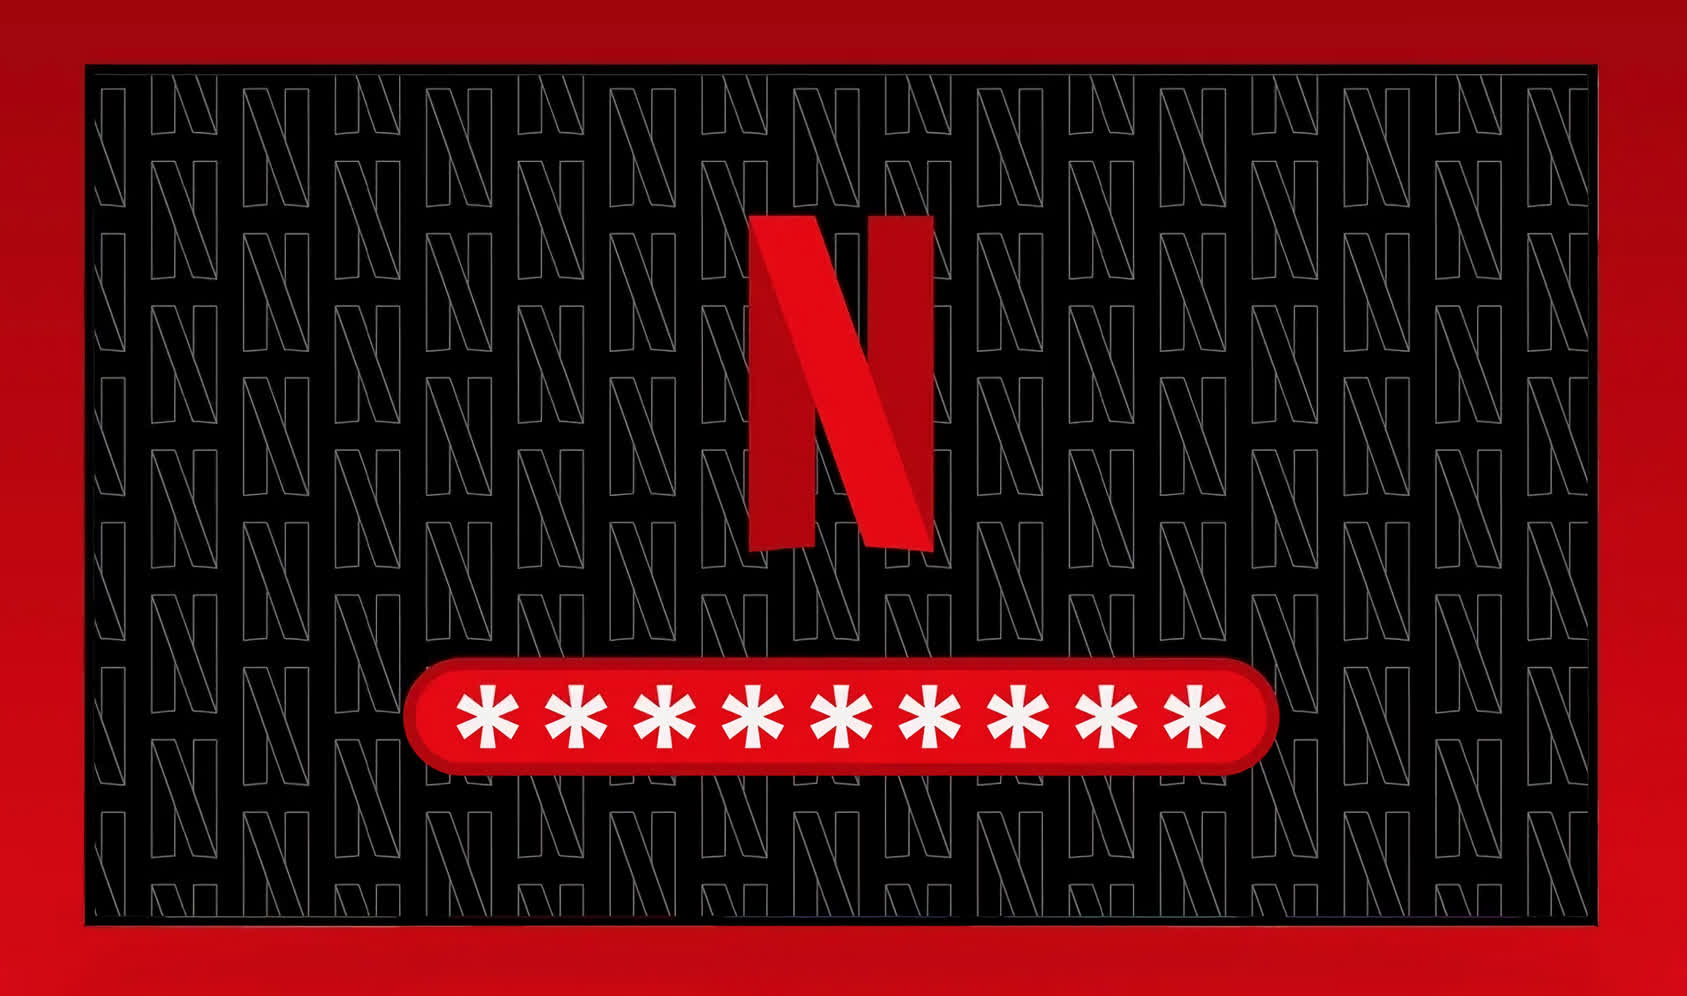 Netflix Wants To Stop User Account Sharing With “Add An Extra Member” Feature